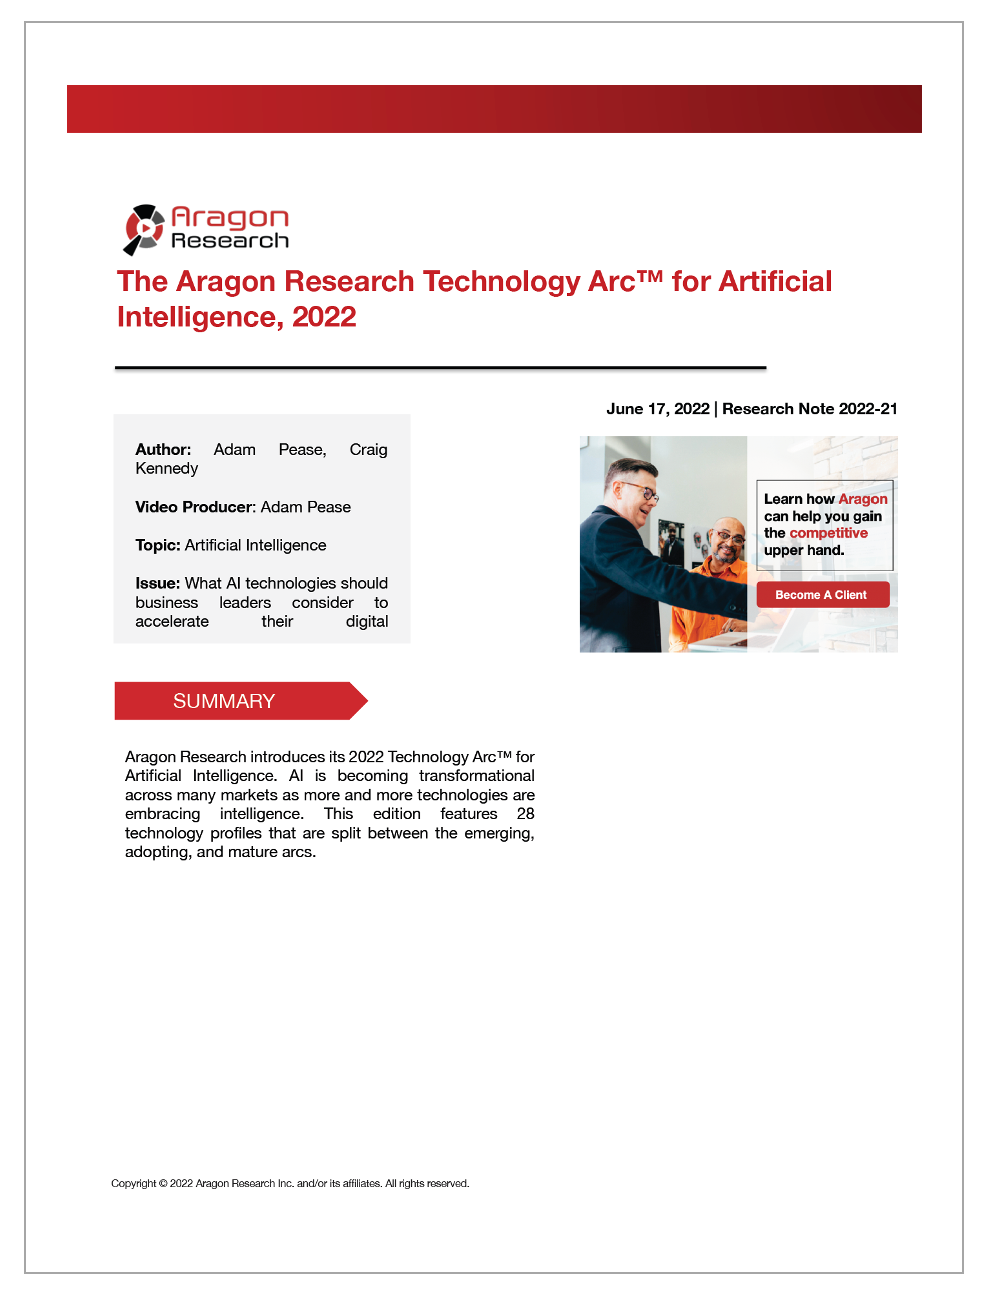 2022-21 The Aragon Research Technology Arc for Artificial Intelligence, 2022